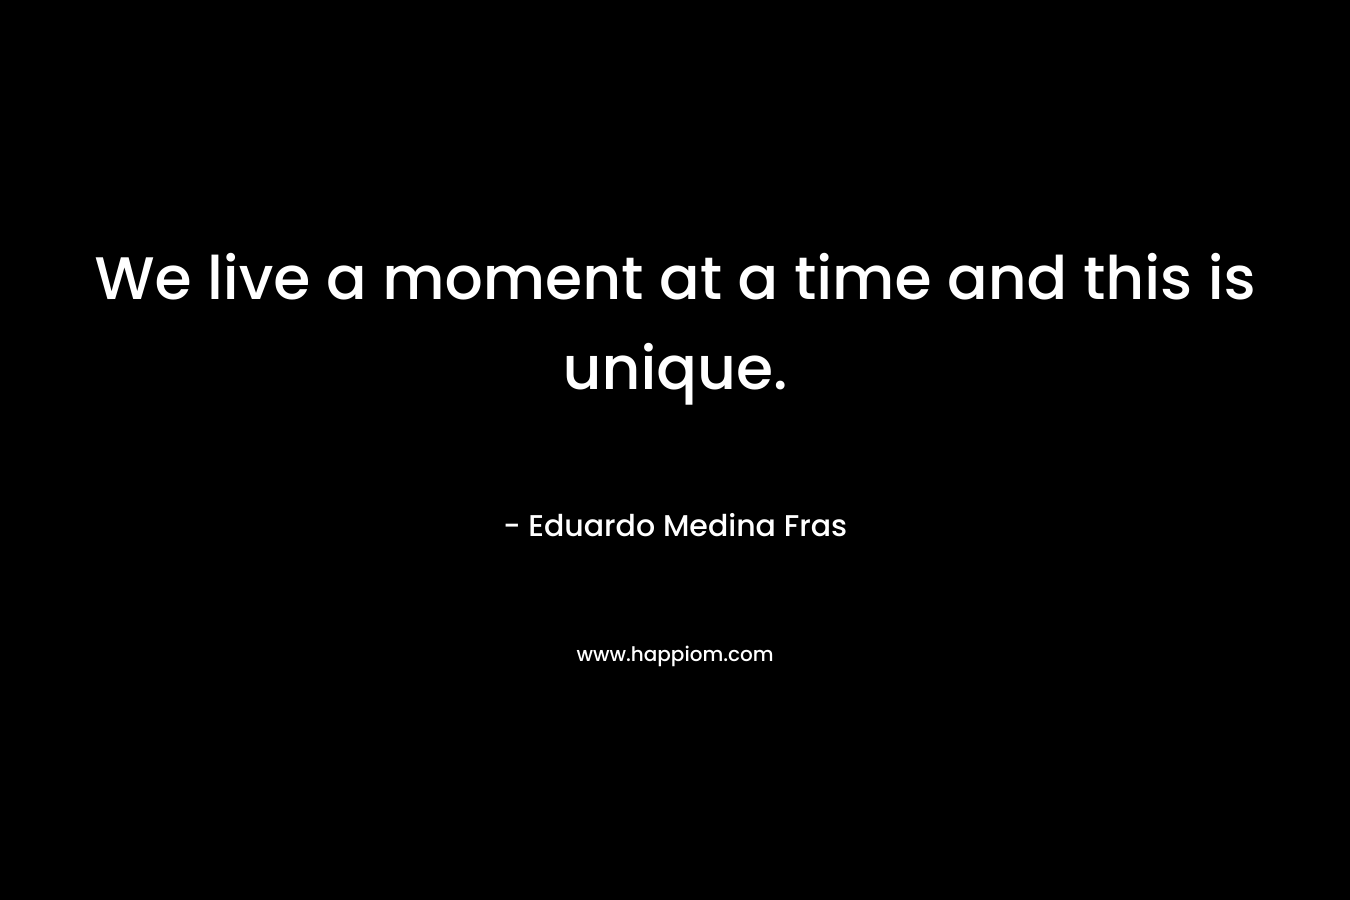 We live a moment at a time and this is unique. – Eduardo Medina Fras